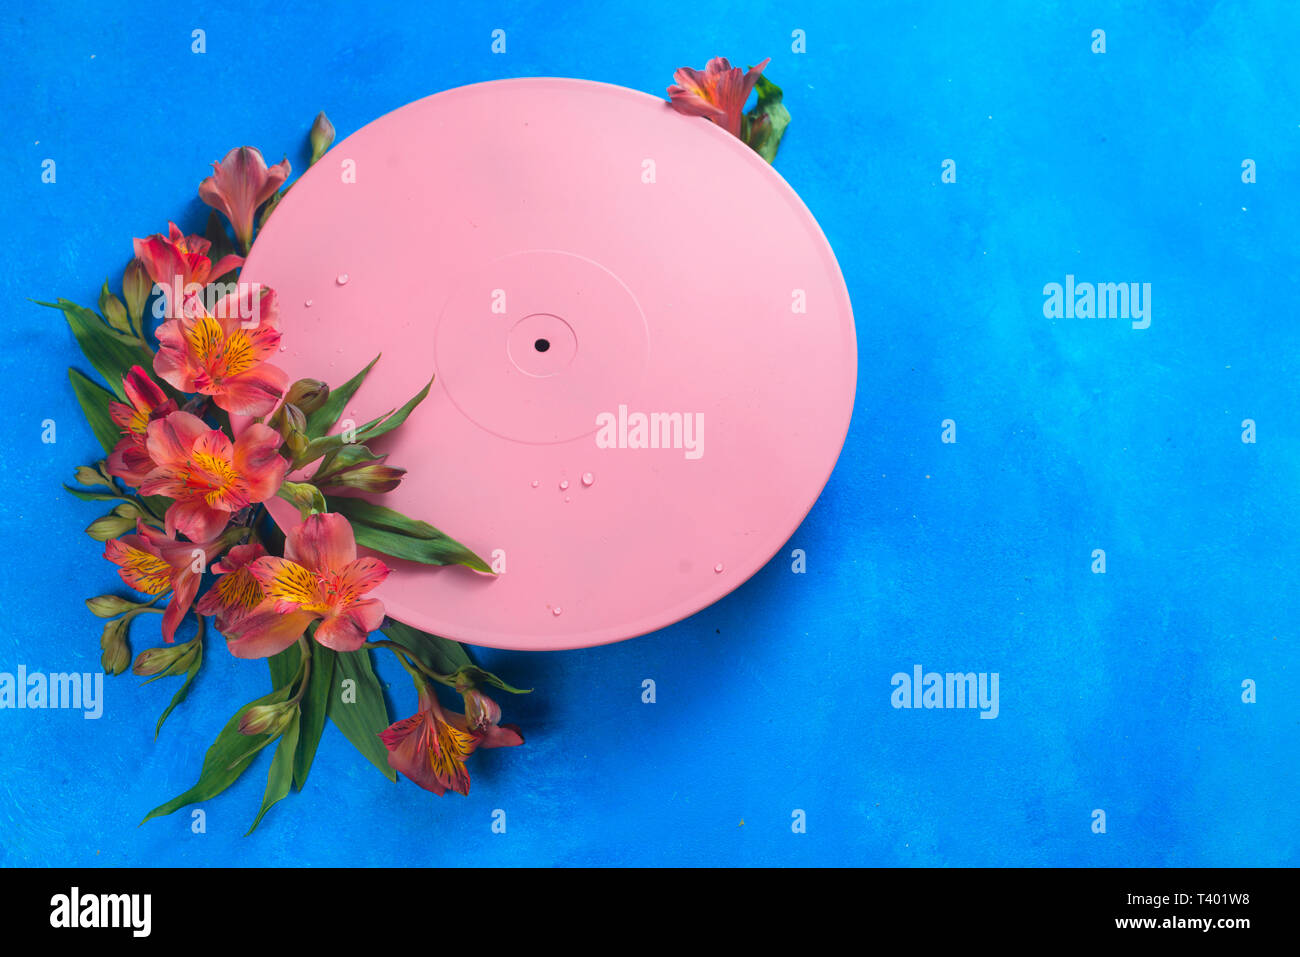 Pink vinyl record with flowers. Color blocking flat lay concept. Musical floral still life on a blue background with copy space Stock Photo